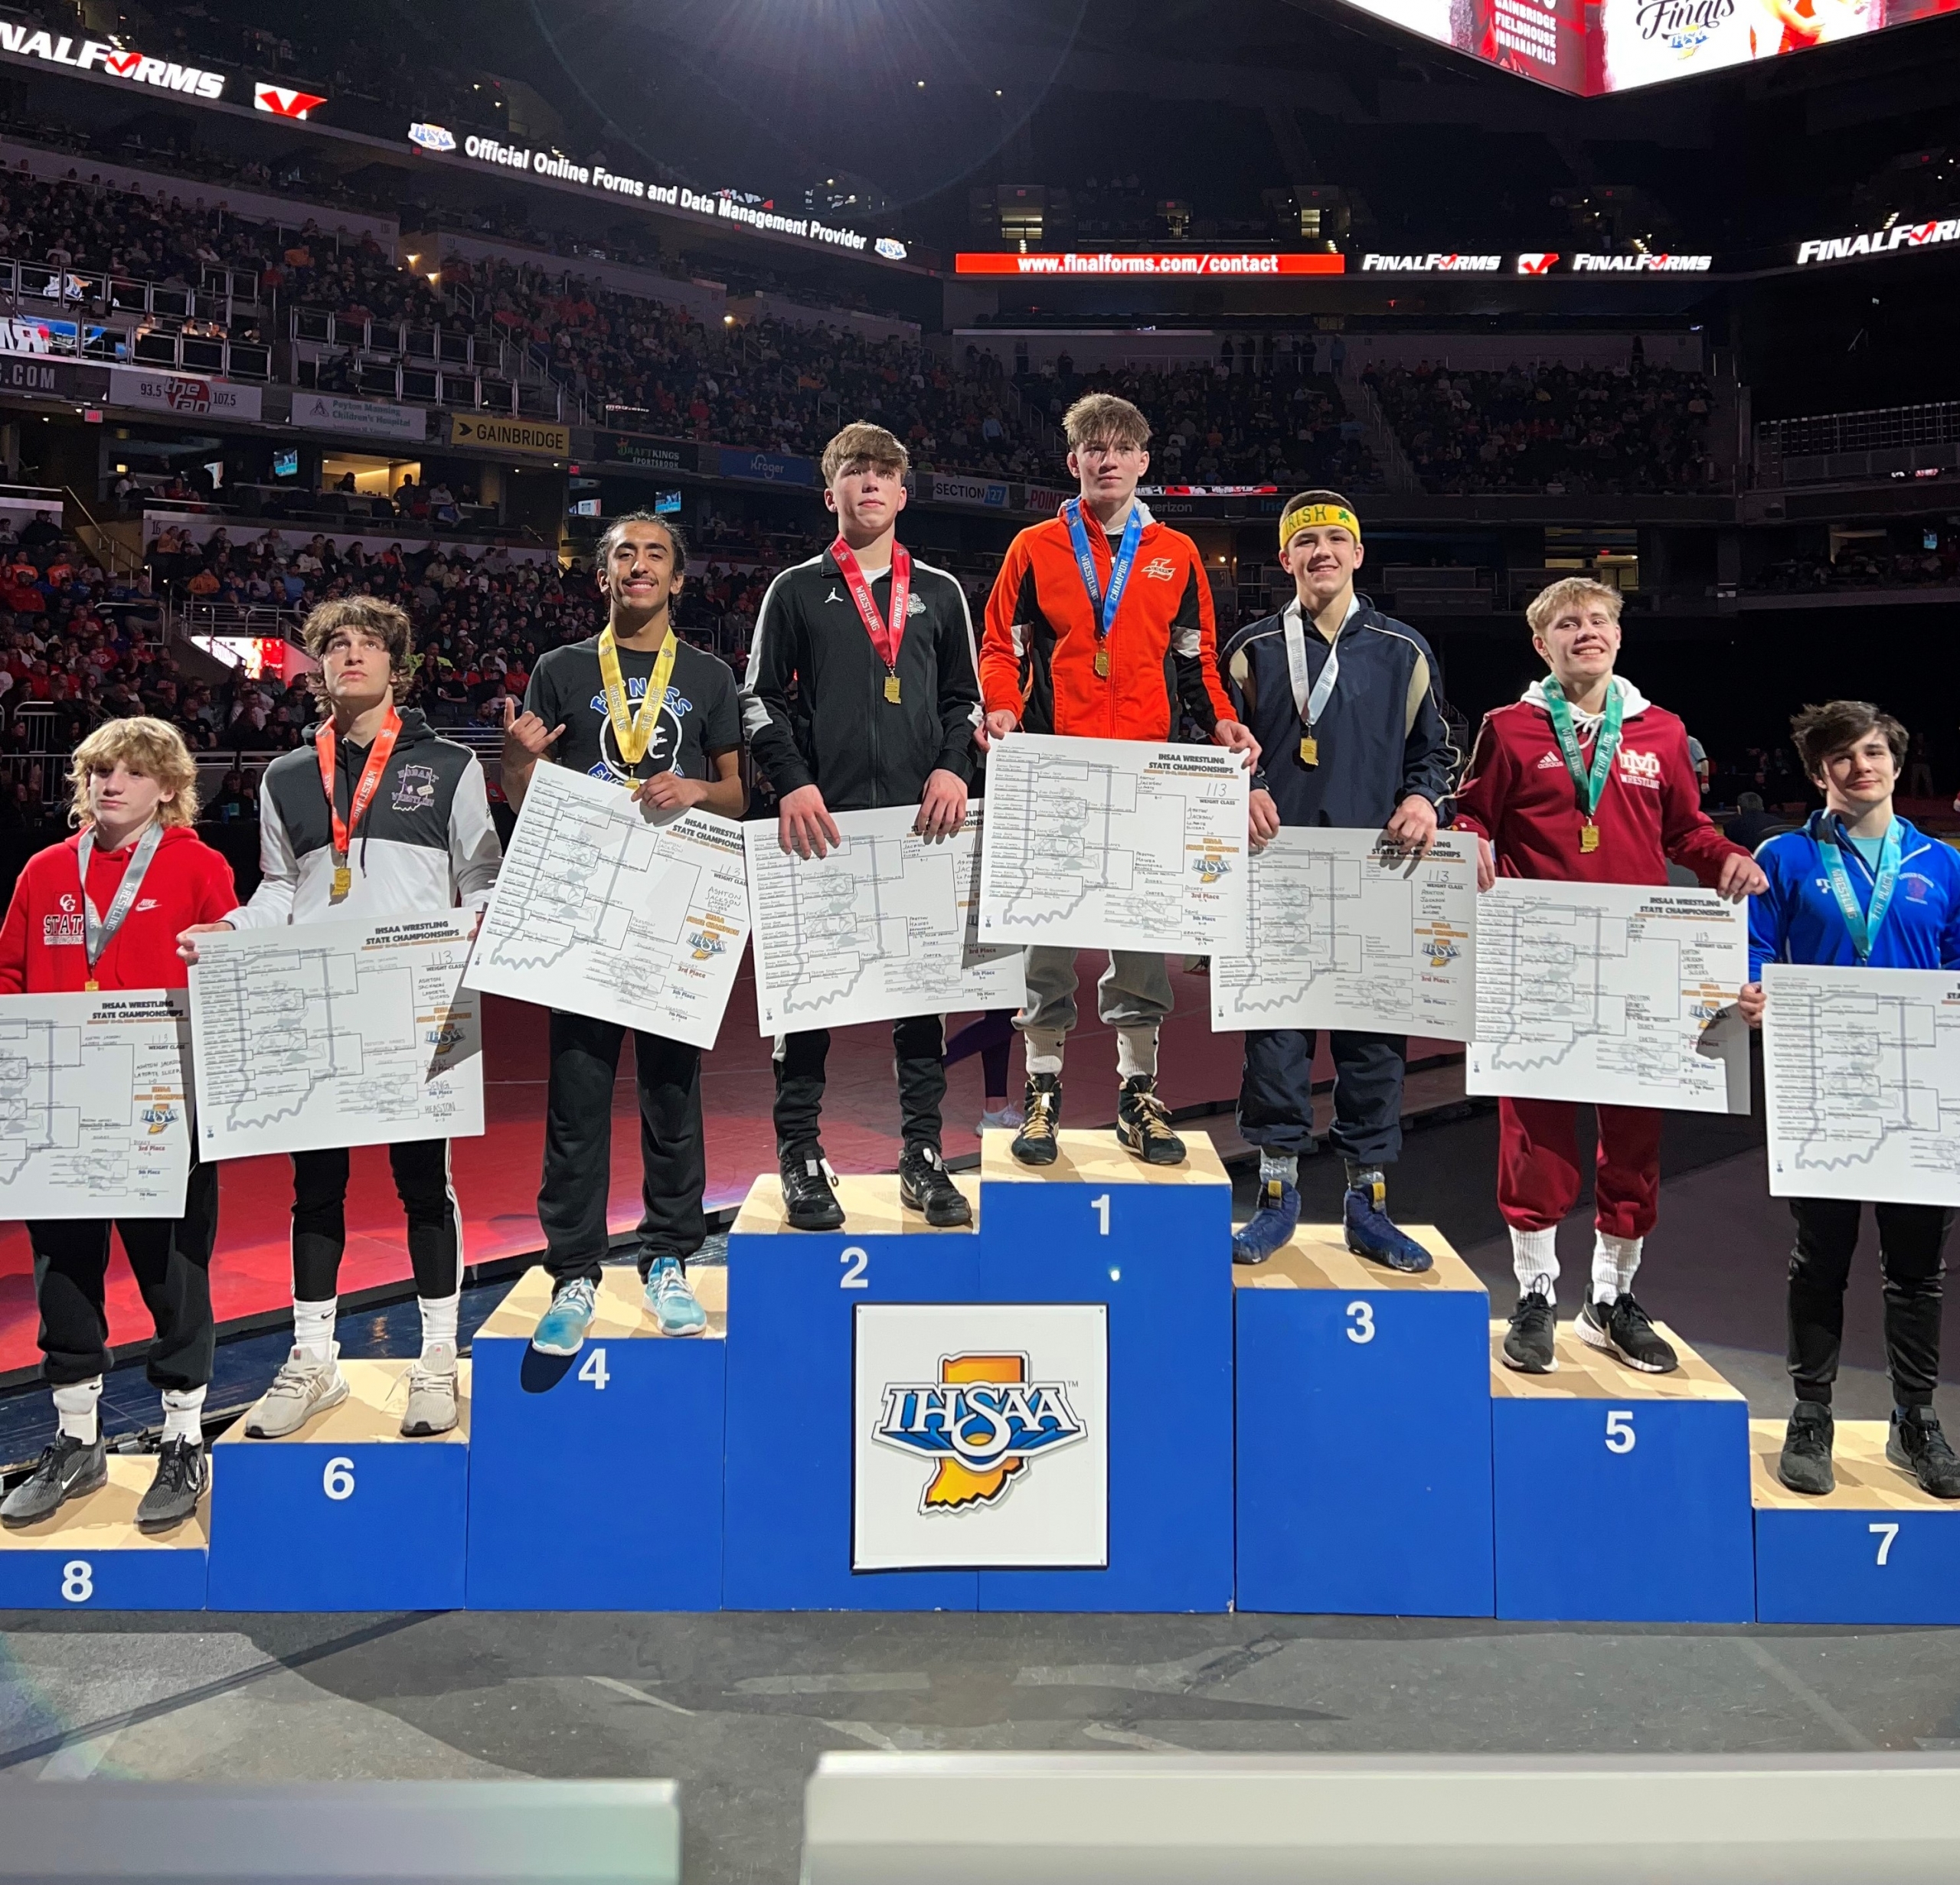 Senior Johnny Cortez stands on the podium receiving his medal for his 4th place finish at state.